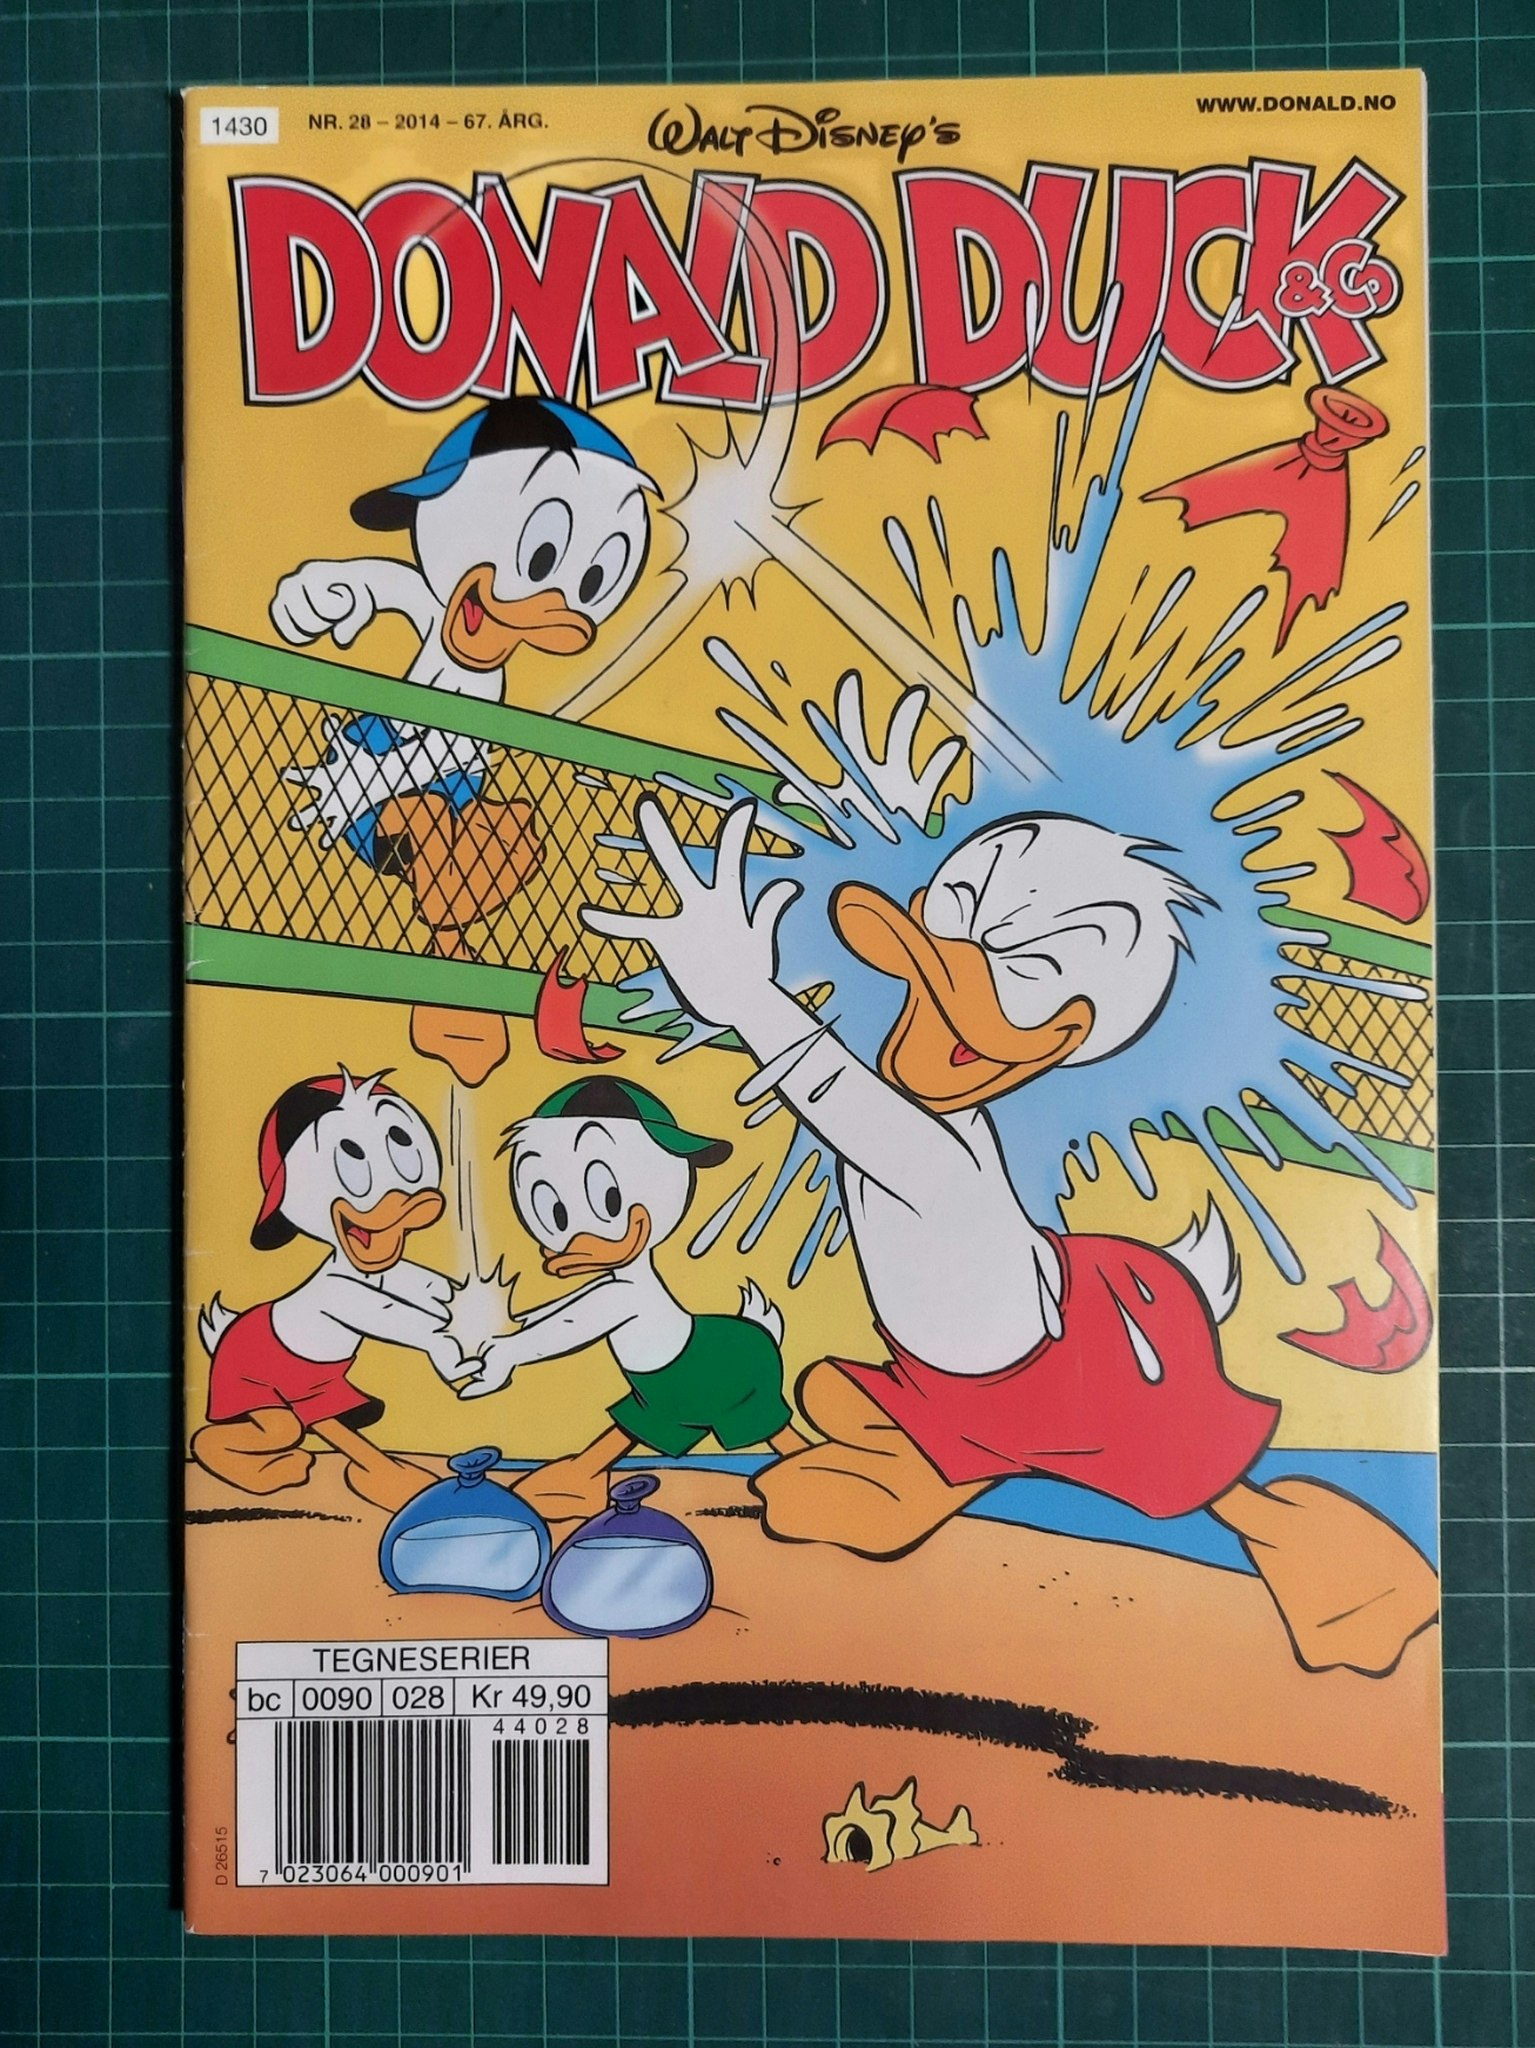 Donald Duck & Co 2014 - 28